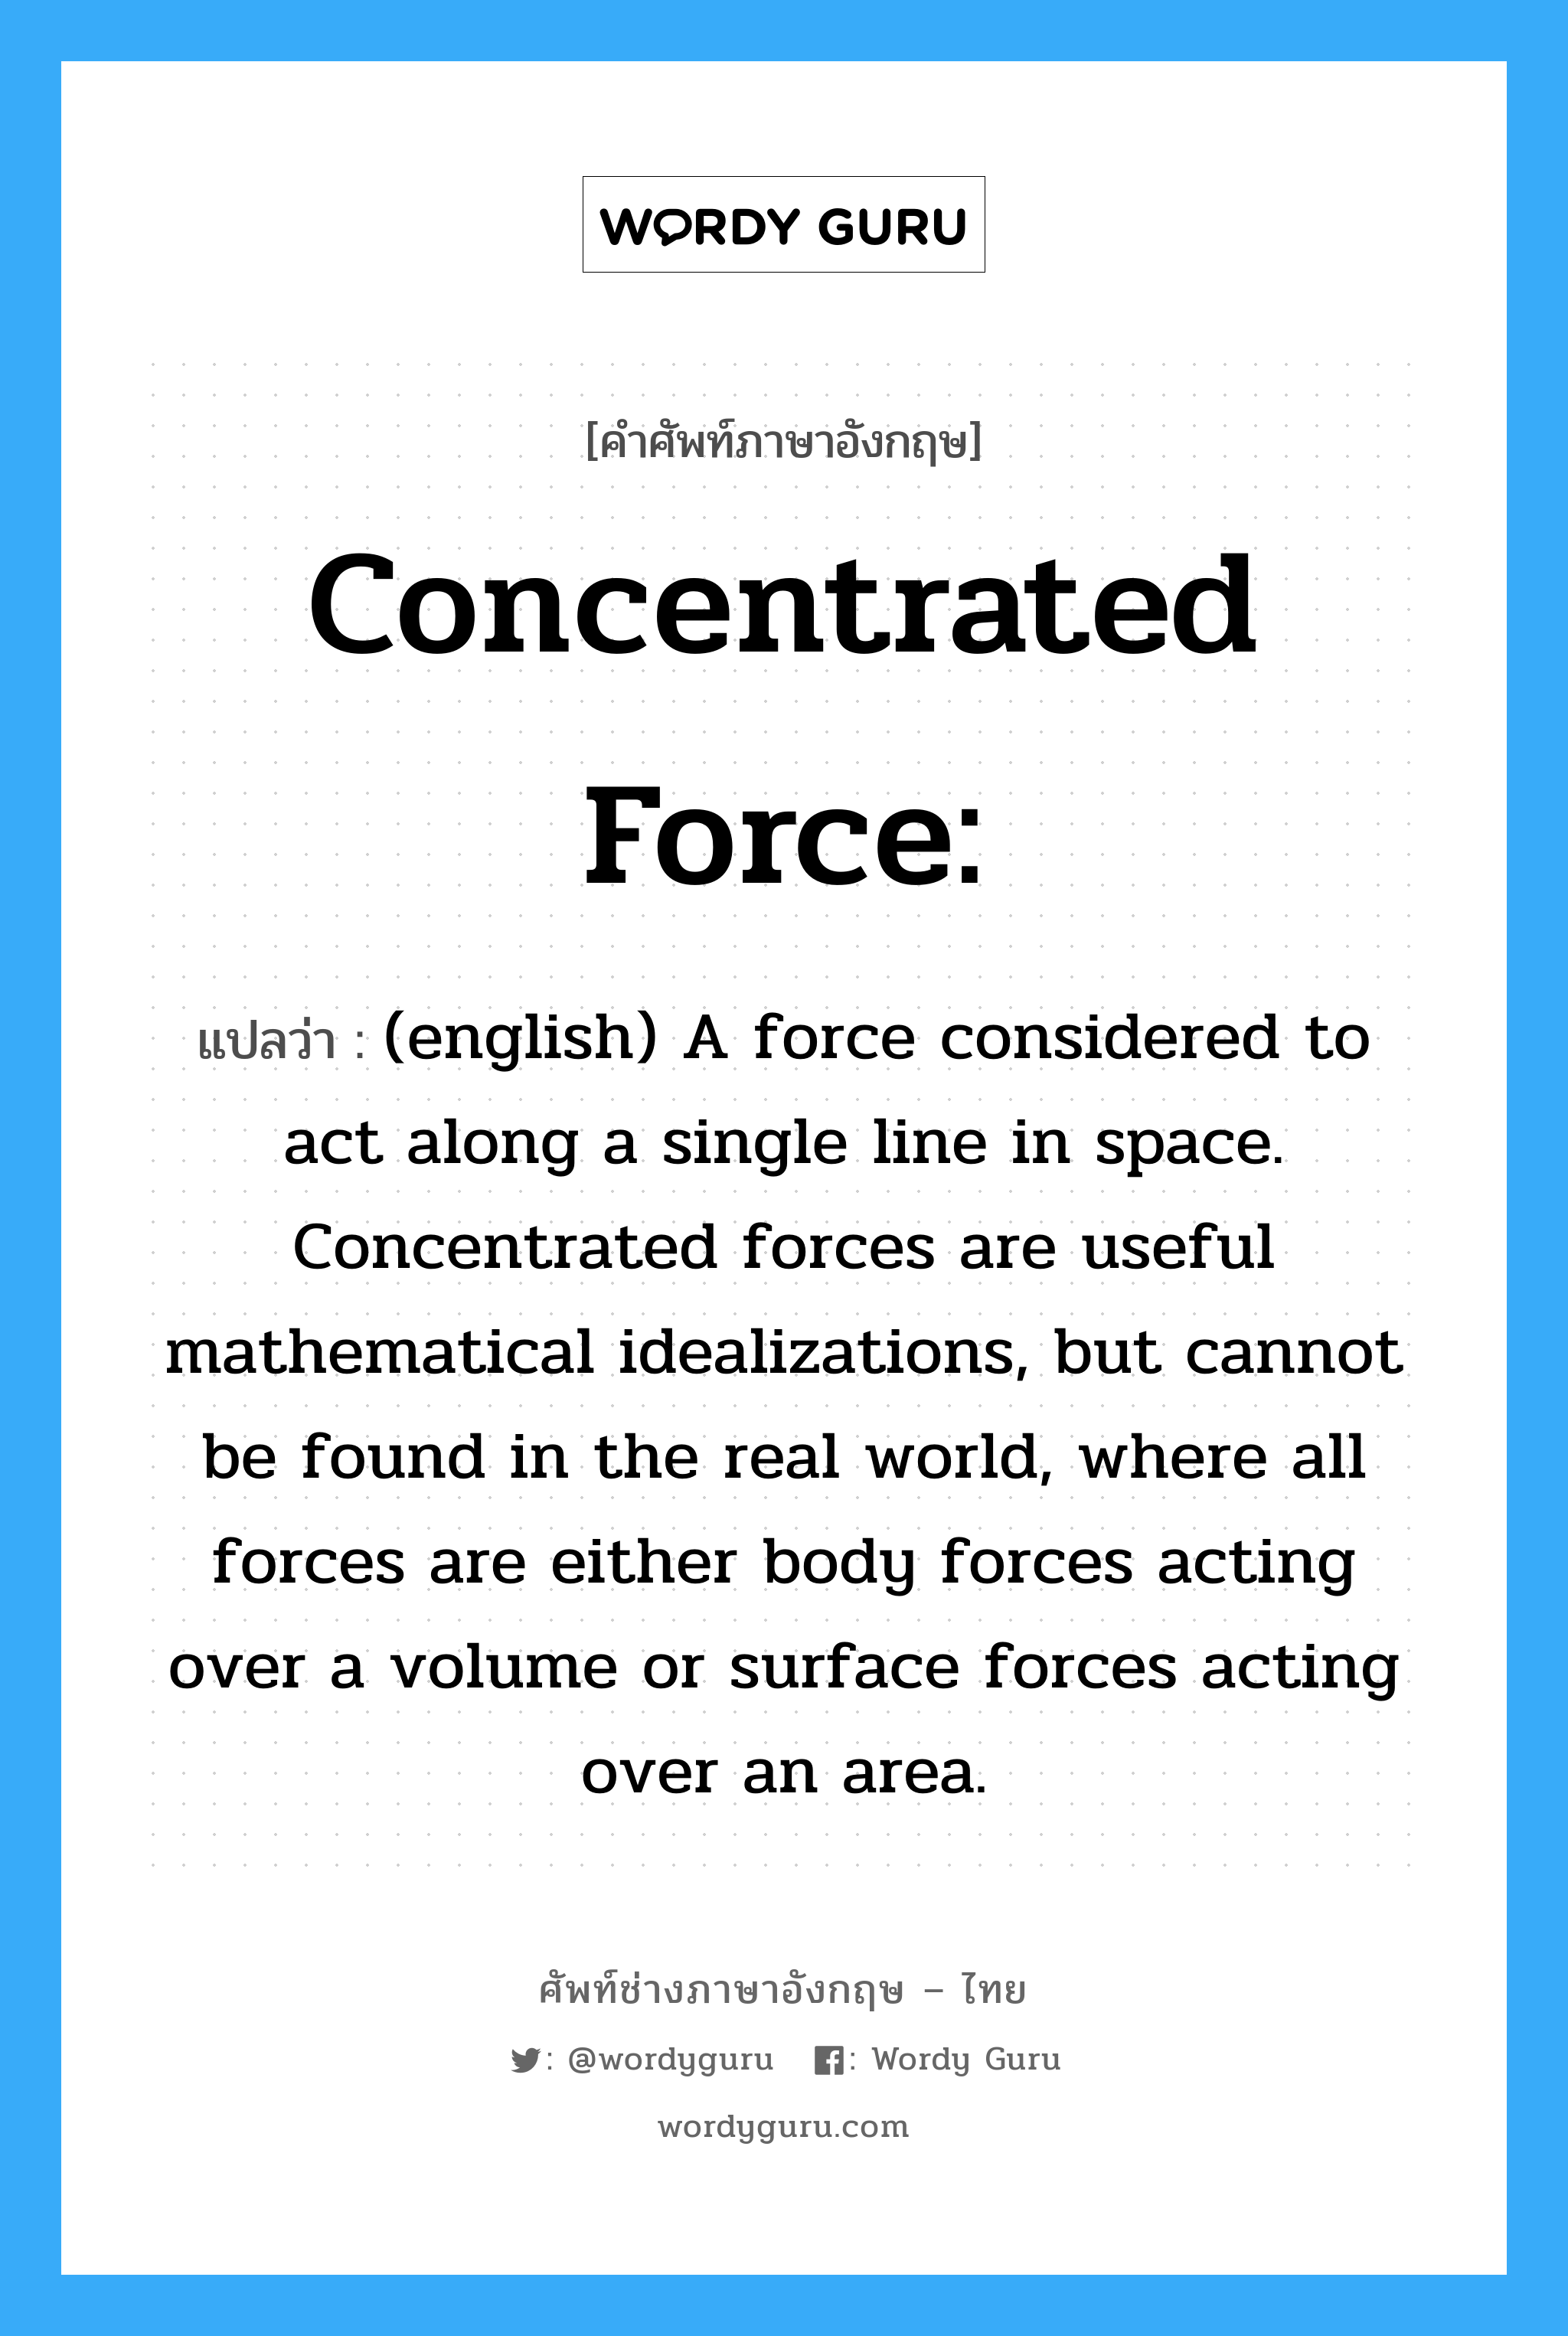 Concentrated force: แปลว่า?, คำศัพท์ช่างภาษาอังกฤษ - ไทย Concentrated force: คำศัพท์ภาษาอังกฤษ Concentrated force: แปลว่า (english) A force considered to act along a single line in space. Concentrated forces are useful mathematical idealizations, but cannot be found in the real world, where all forces are either body forces acting over a volume or surface forces acting over an area.